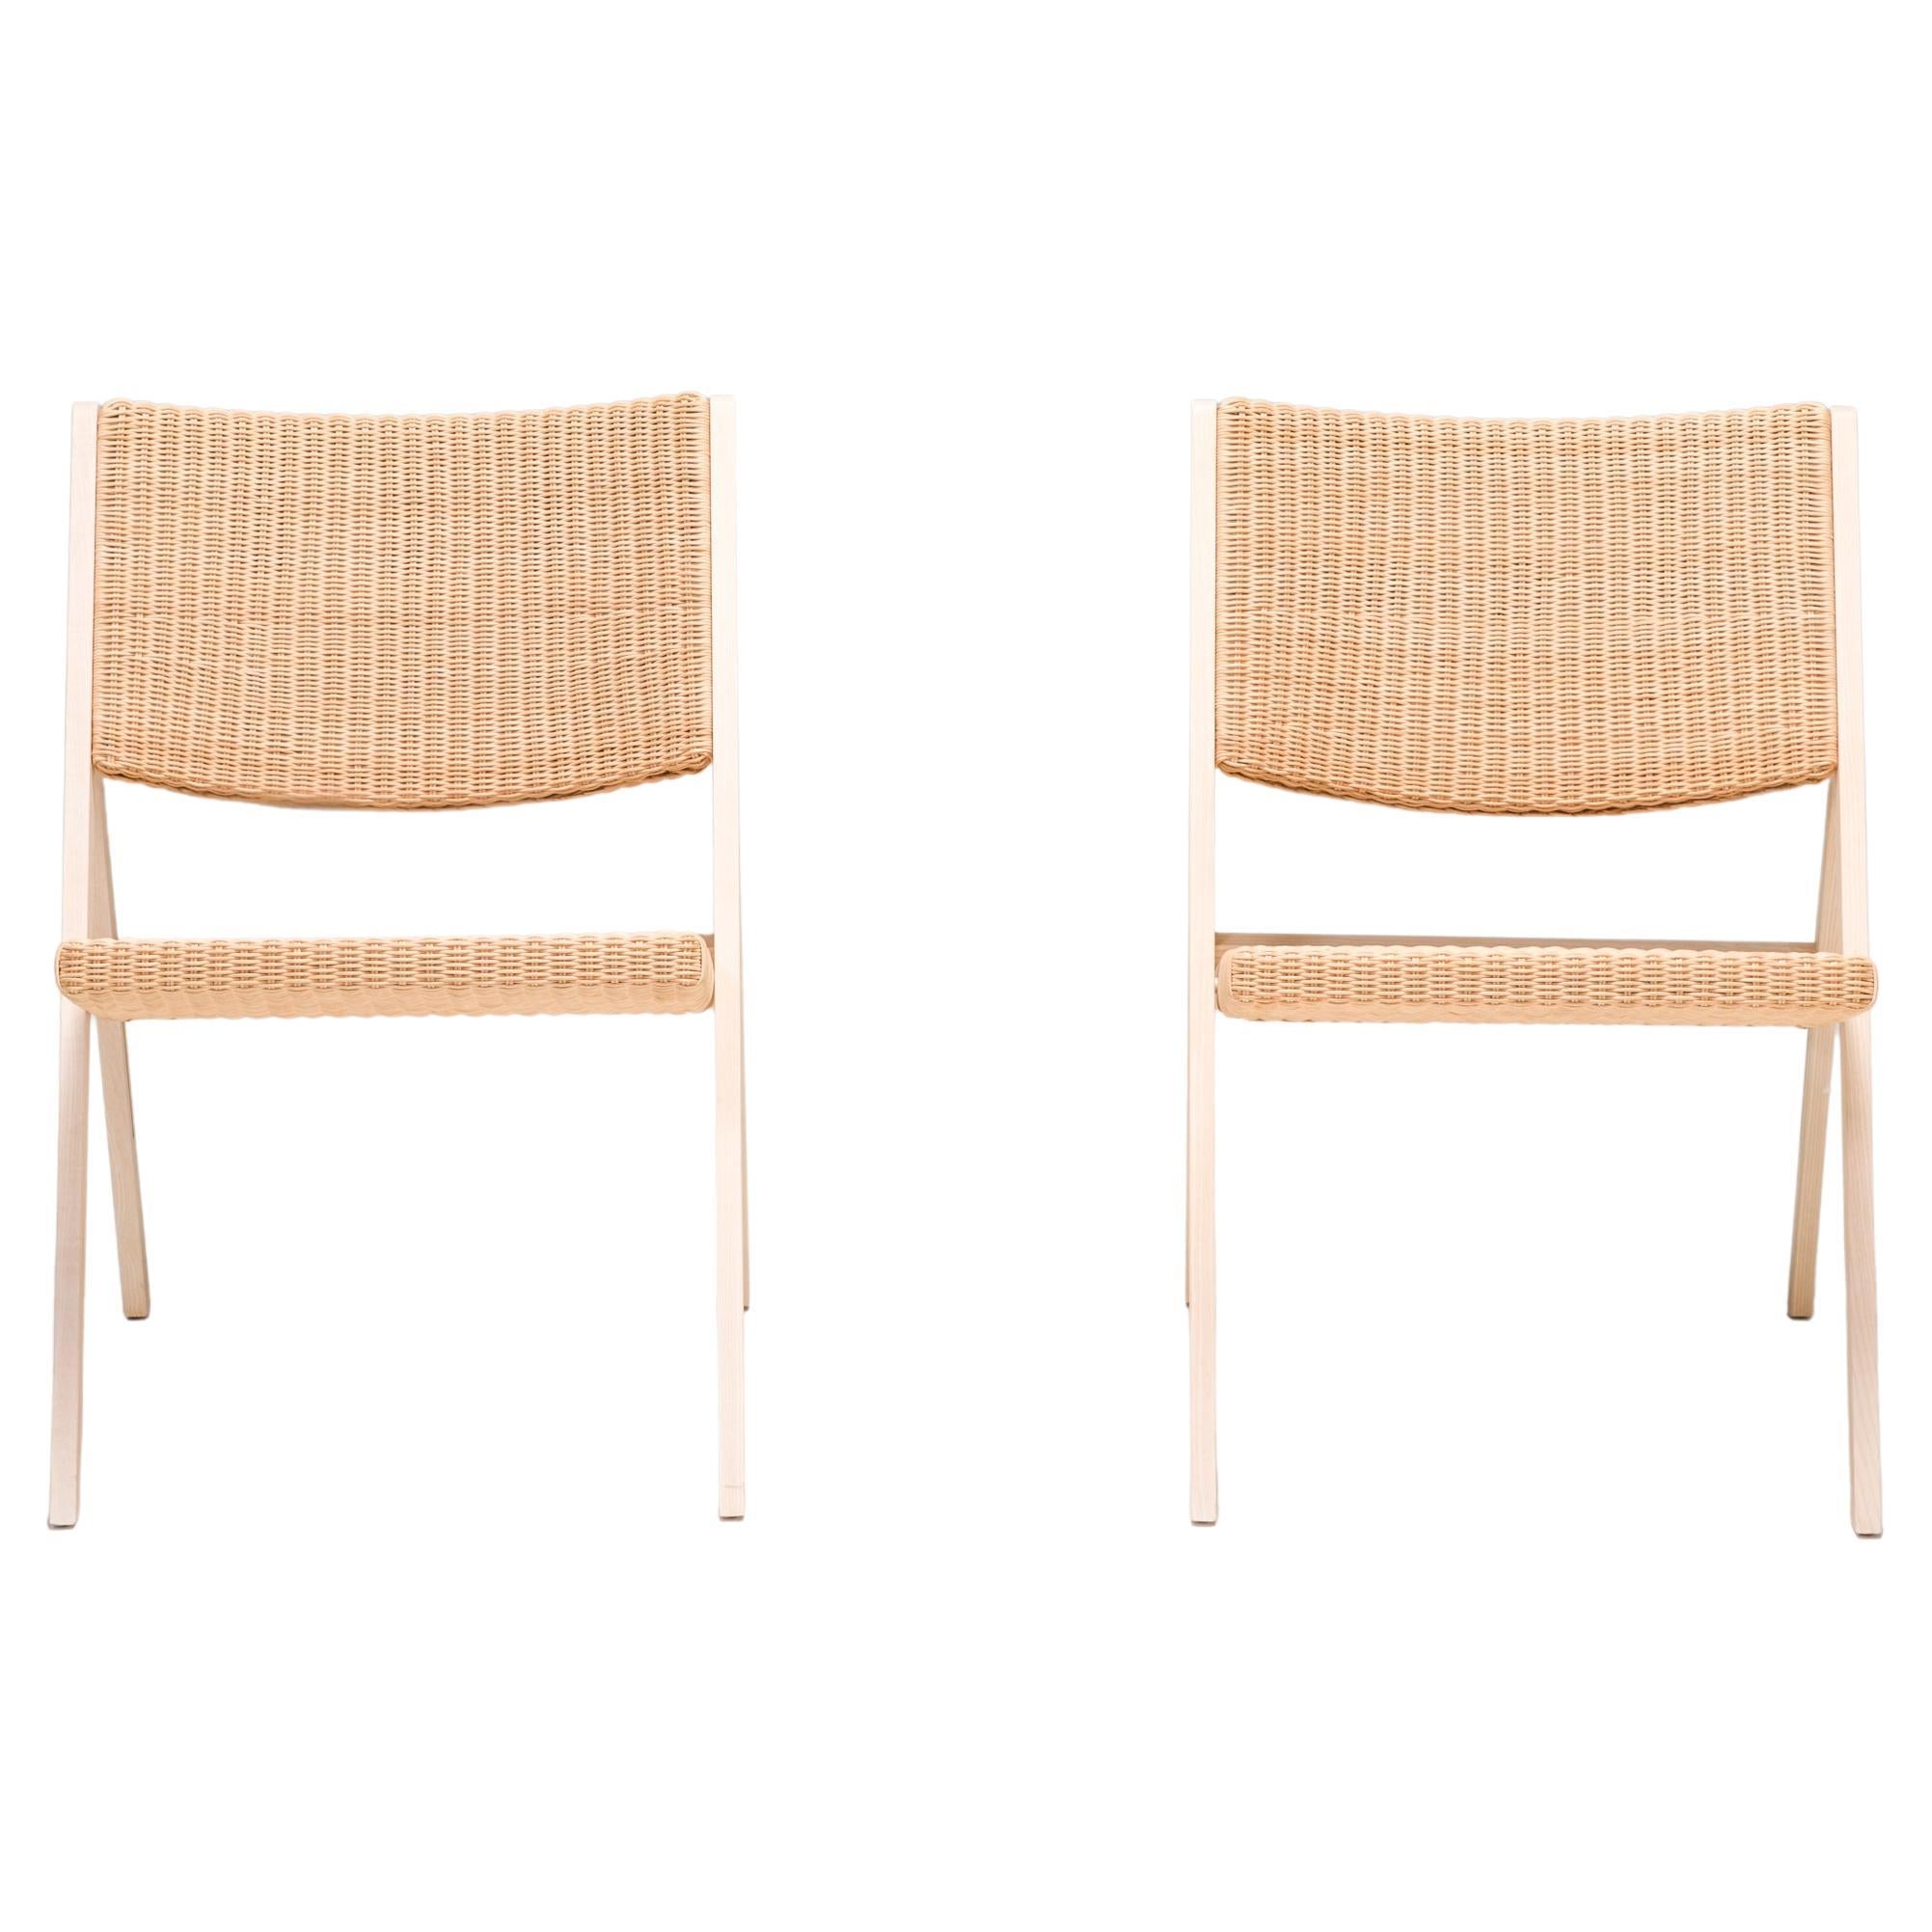 Gio Ponti for Molteni&C D.270.1 Wicker Folding Chairs, Set of 2